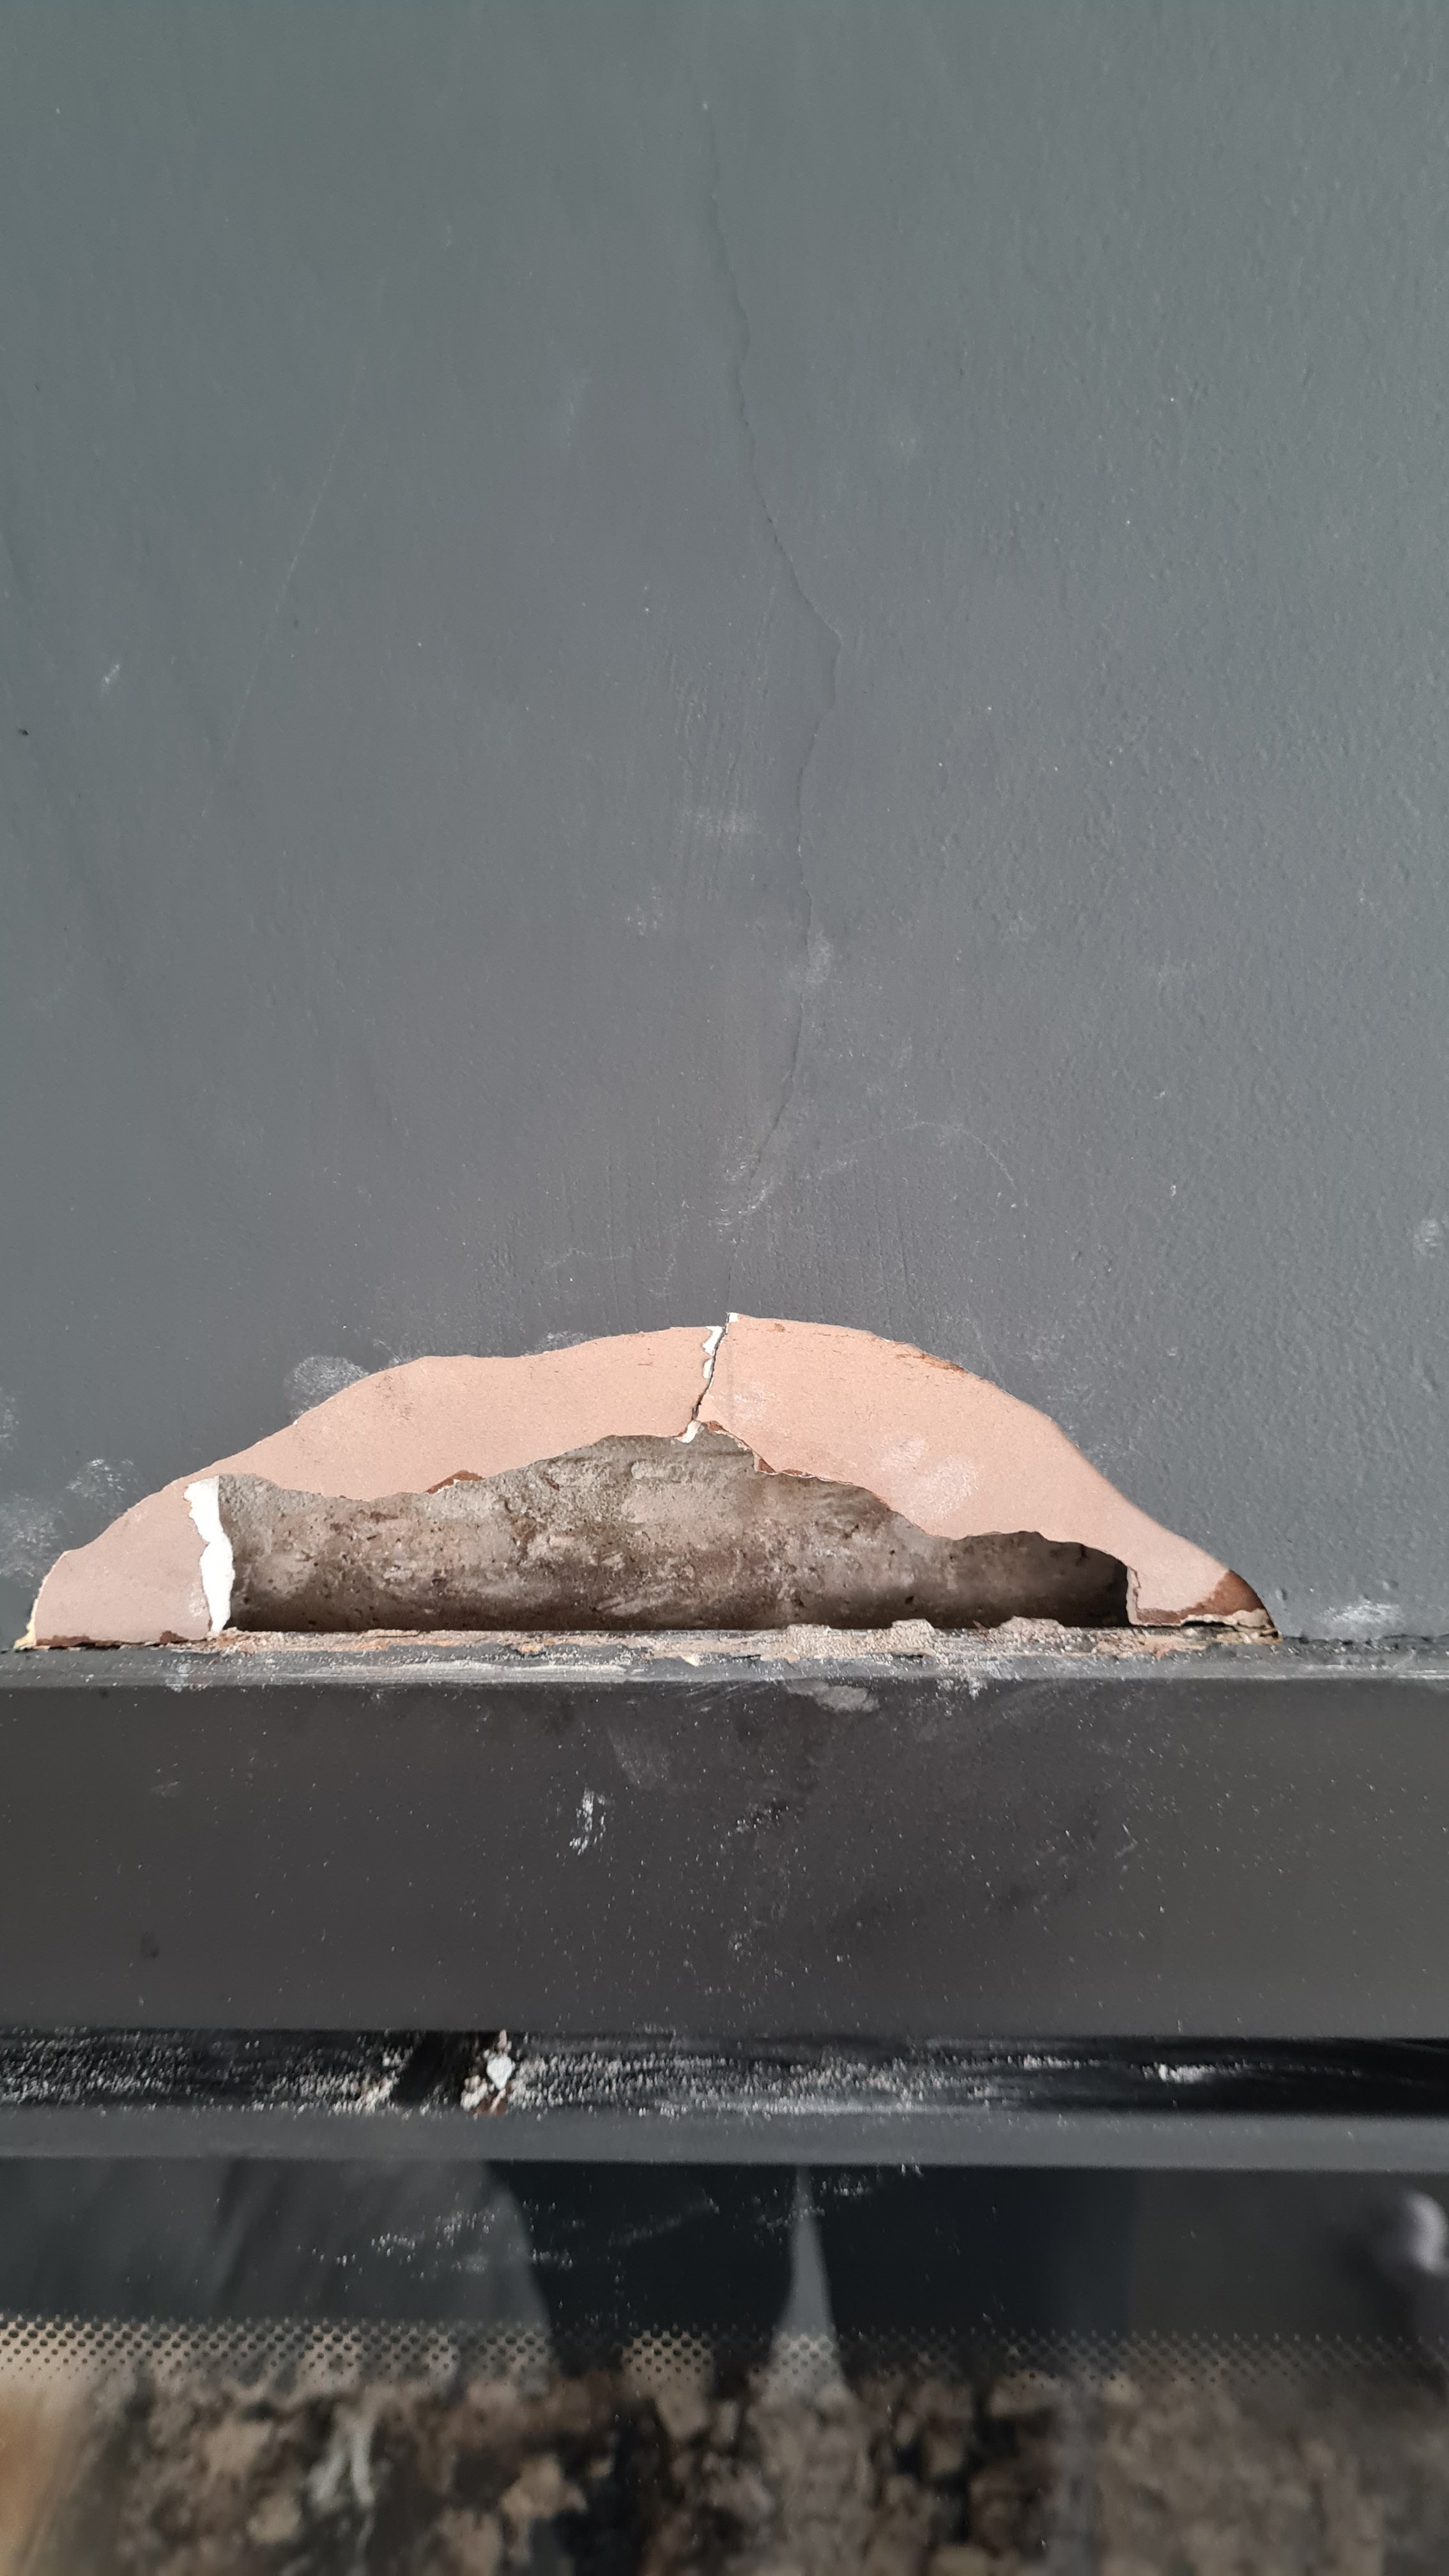 Inset stove plaster peeling and cracked plasterboard